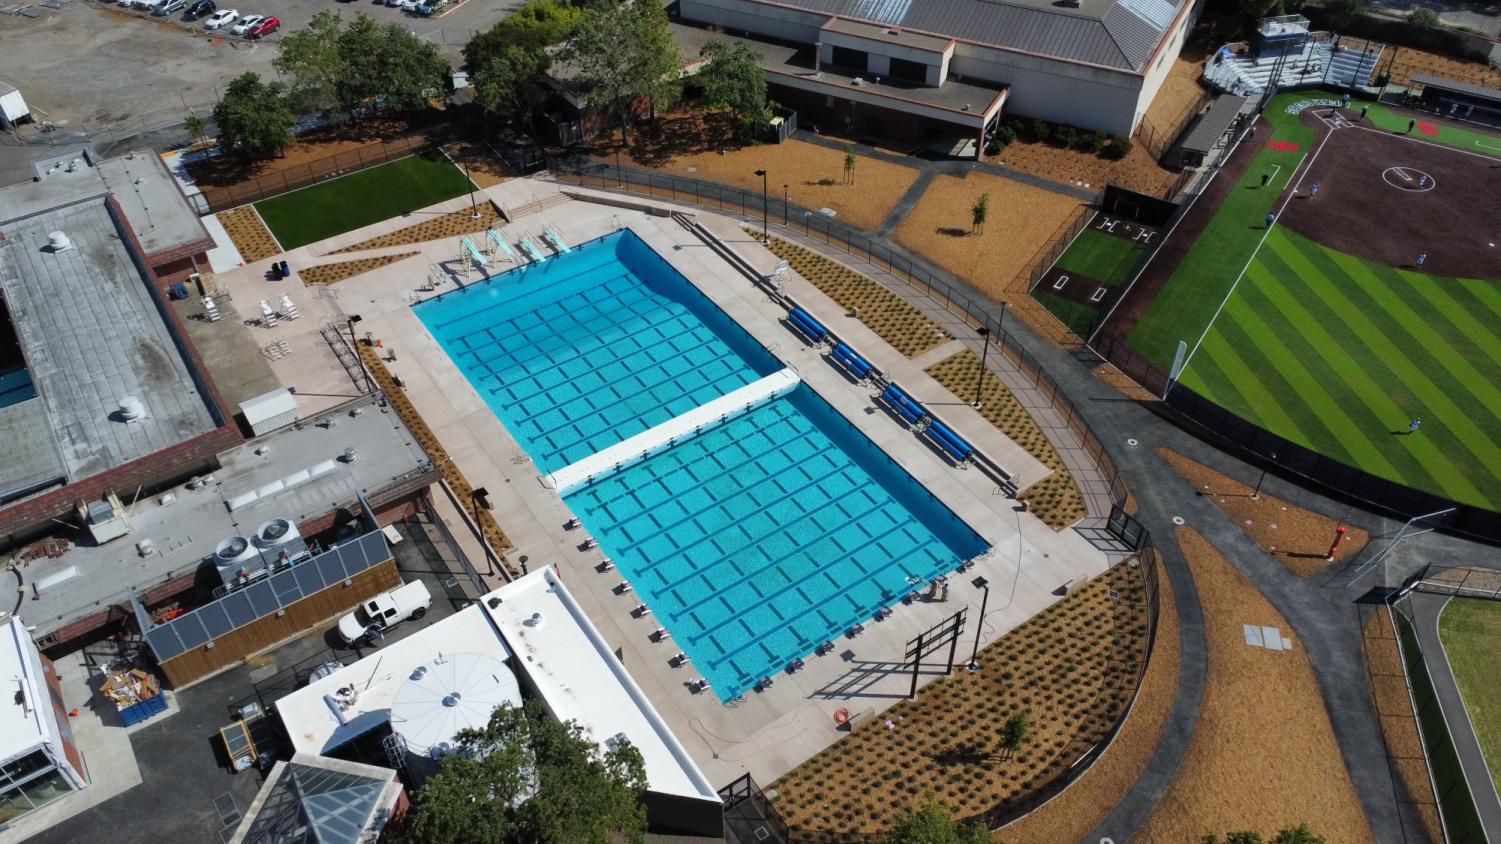 Summer pool party SRJC swim and dive receives Olympicsized upgrade